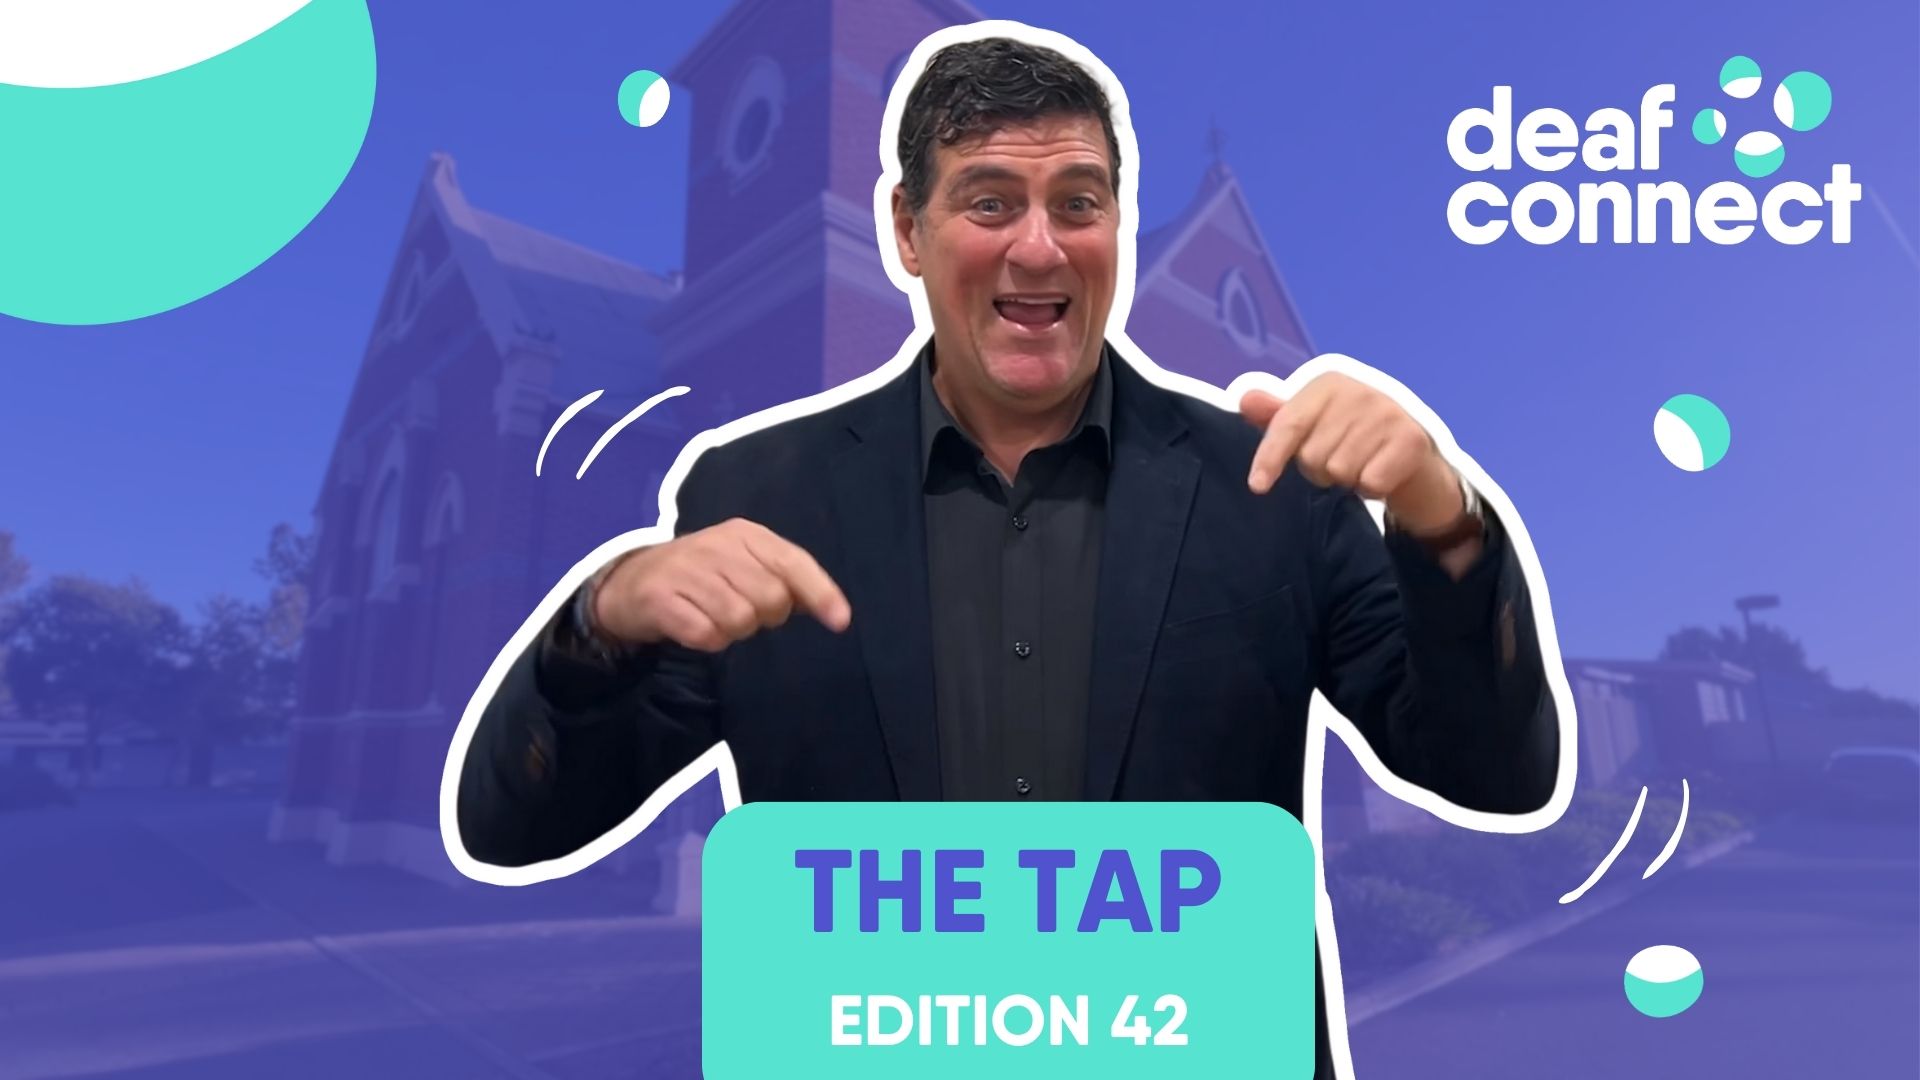 The Tap Ed 42 News